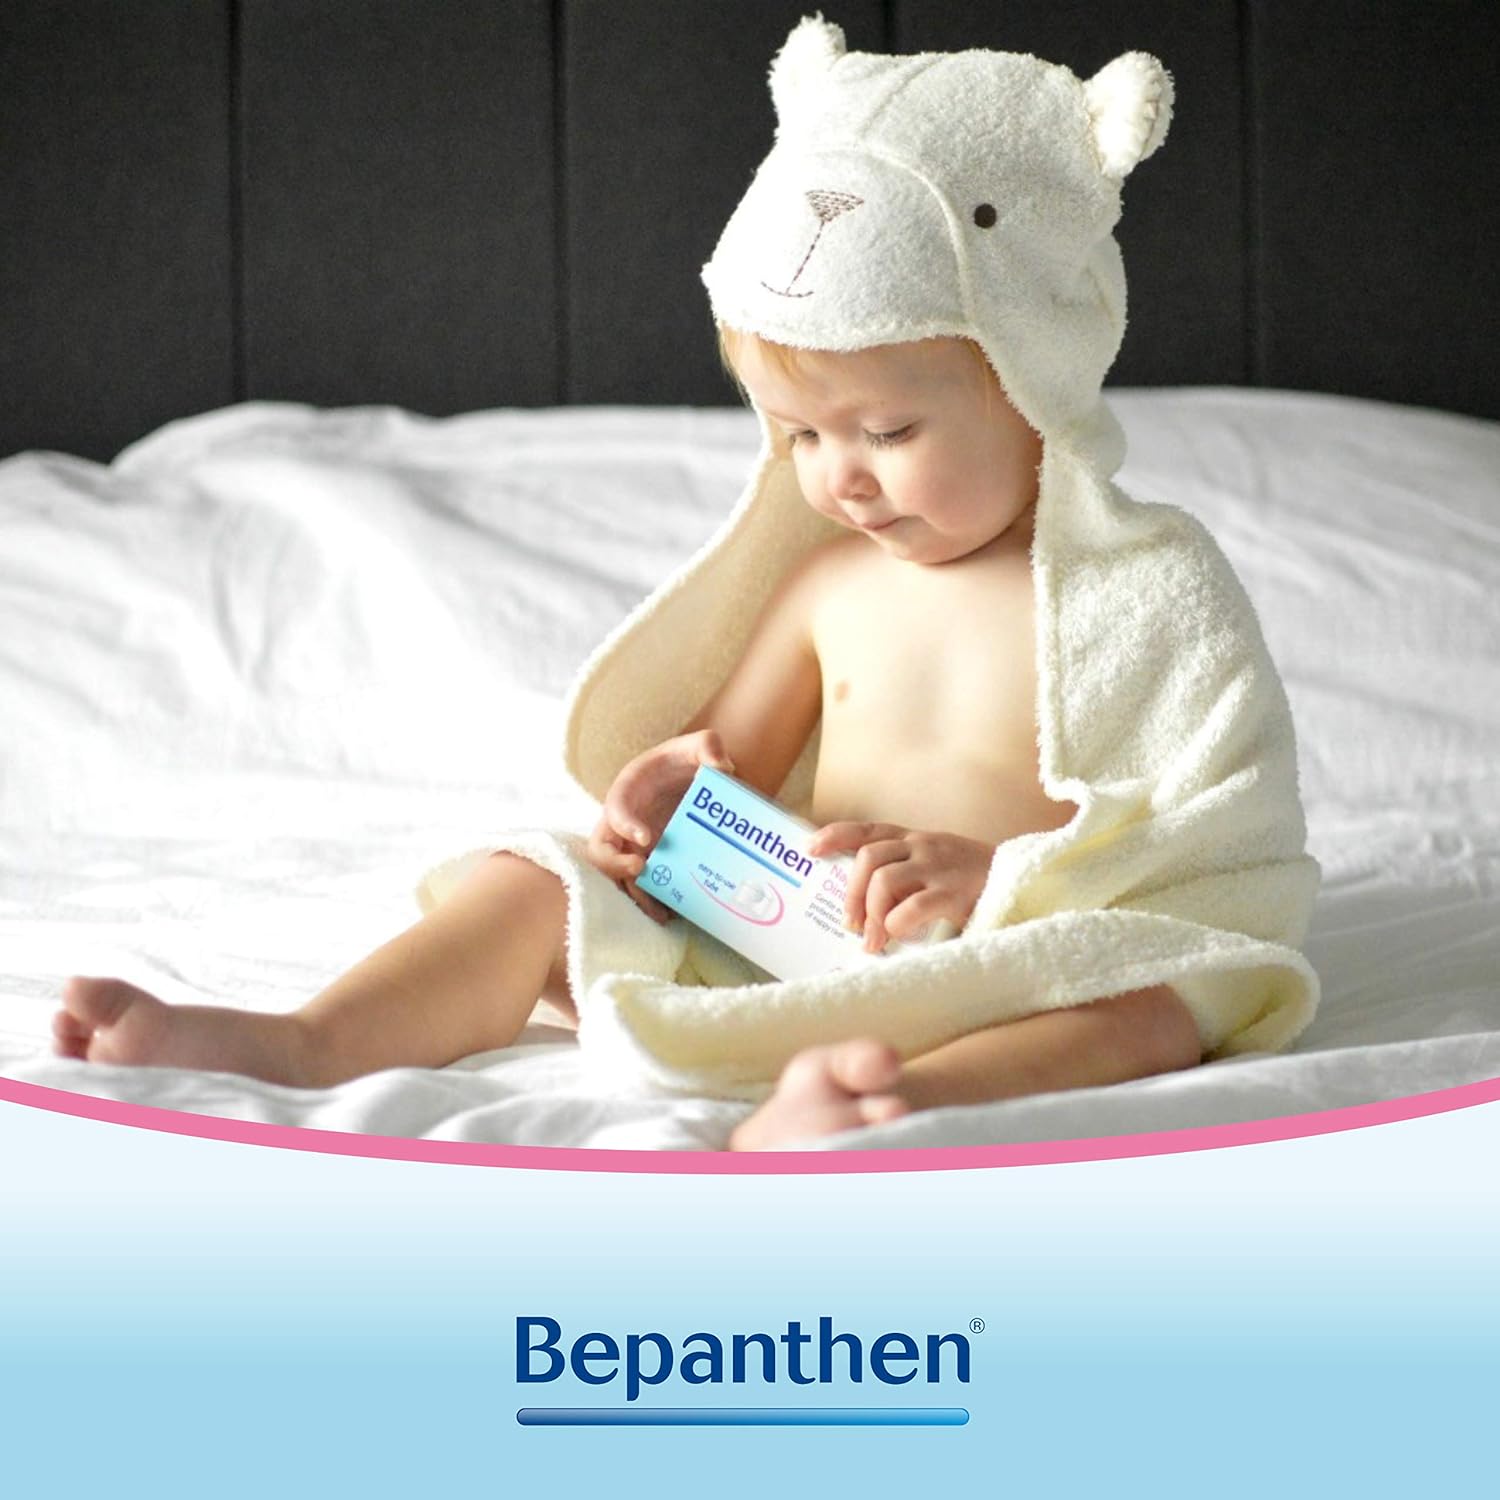 Bepanthen Nappy Care Ointment 5 Percent, 30 g : Baby